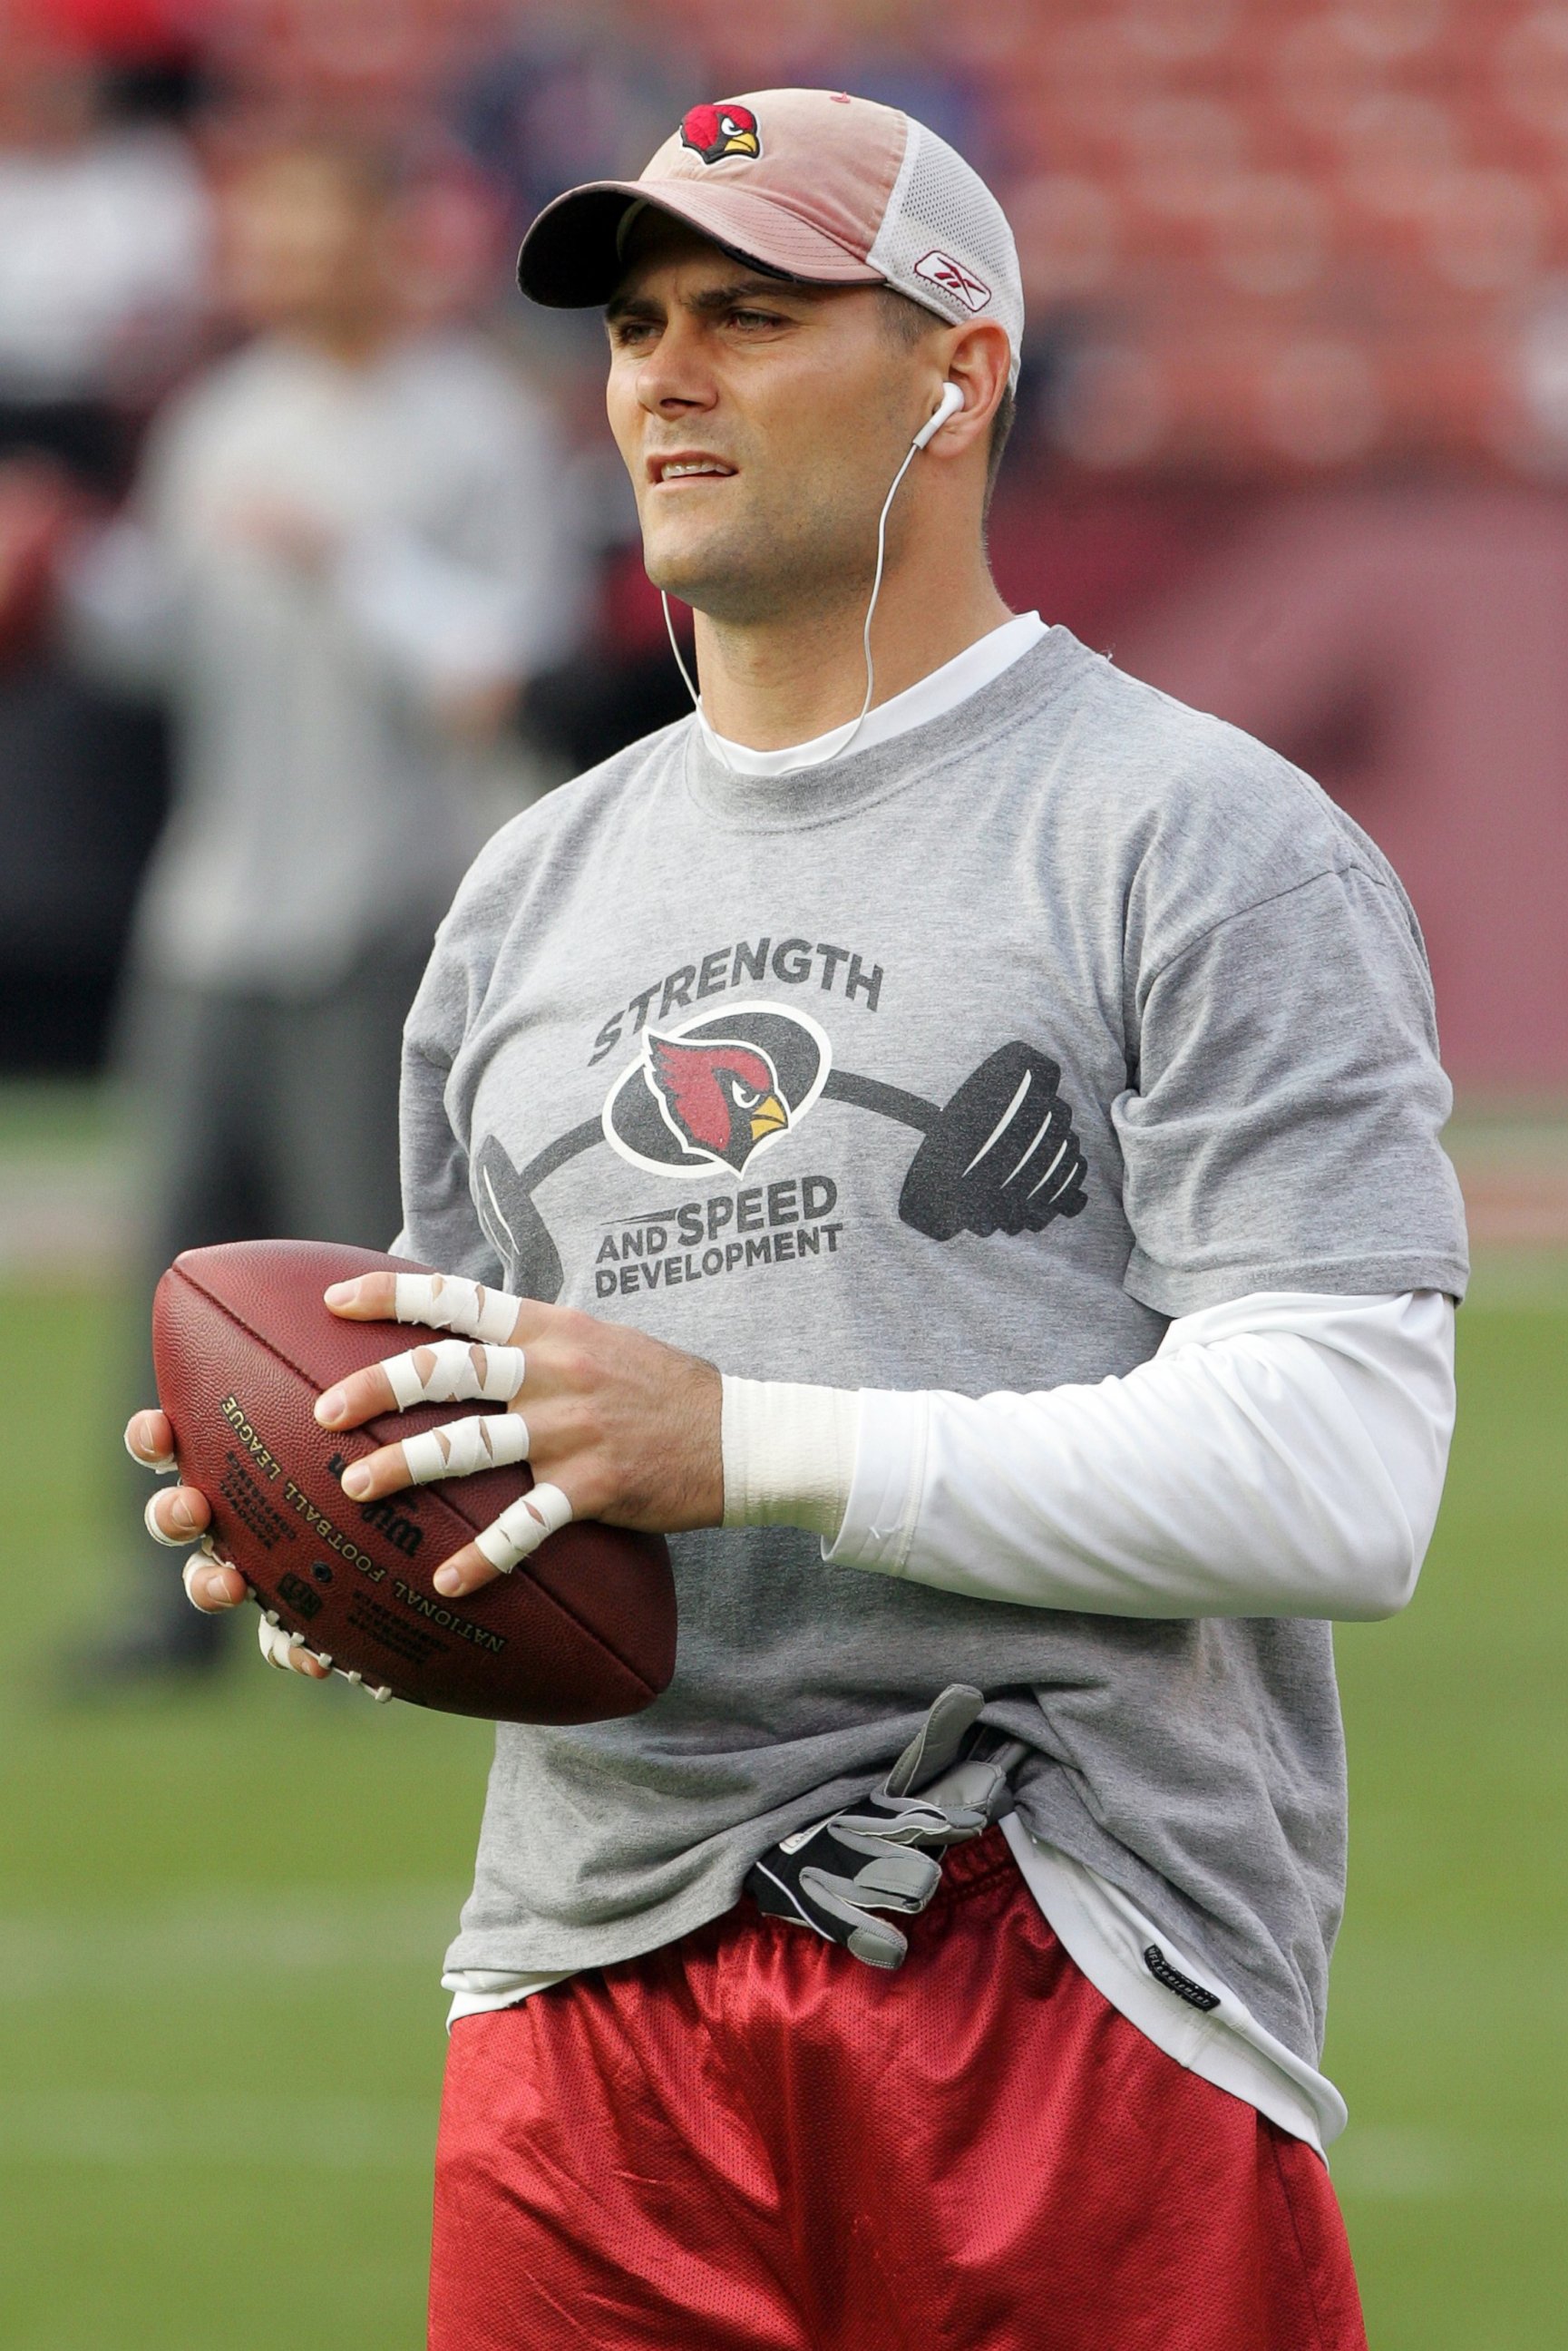 PHOTO: Arizona Cardinals special teams player Sean Morey listens to audio as he warms up before a game against the San Francisco 49ers at Candlestick Park on December 14, 2009 in San Francisco, California. 